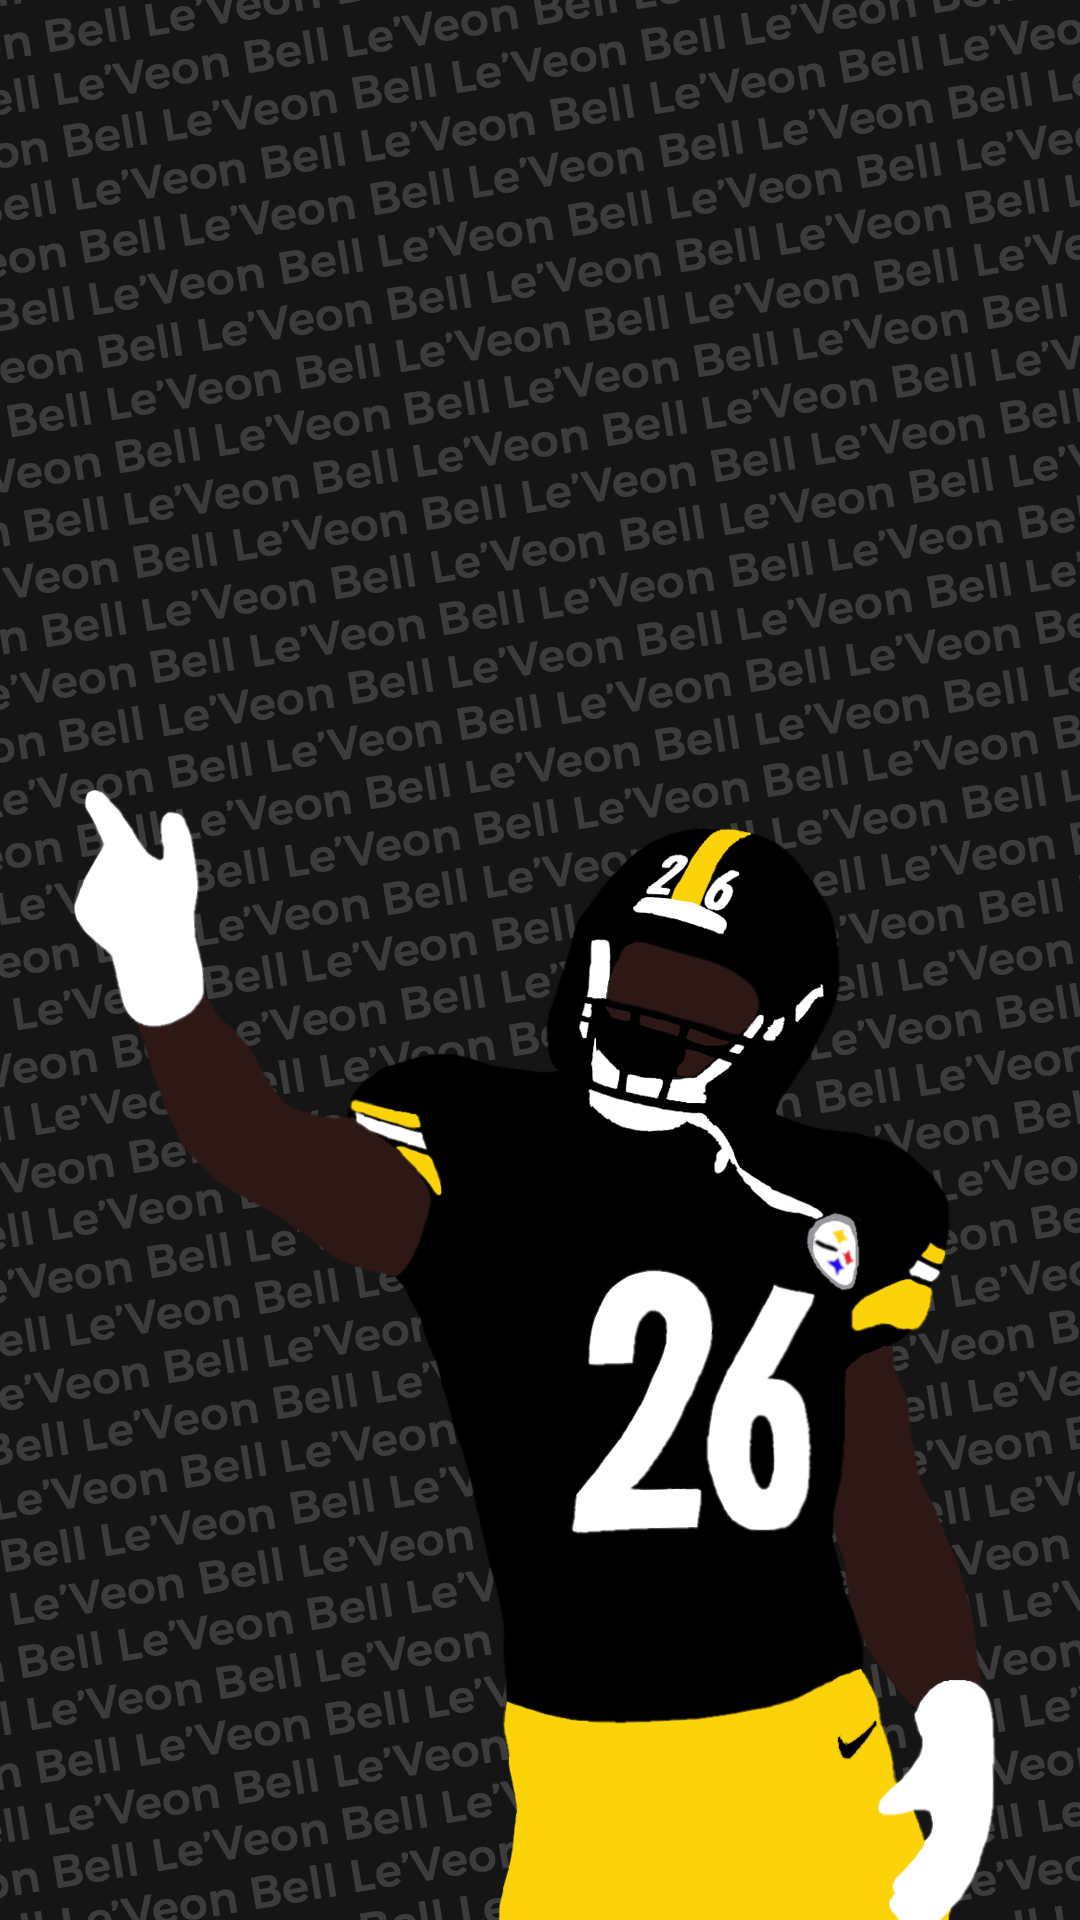 I made another wallpaper, this one with Le'Veon Bell